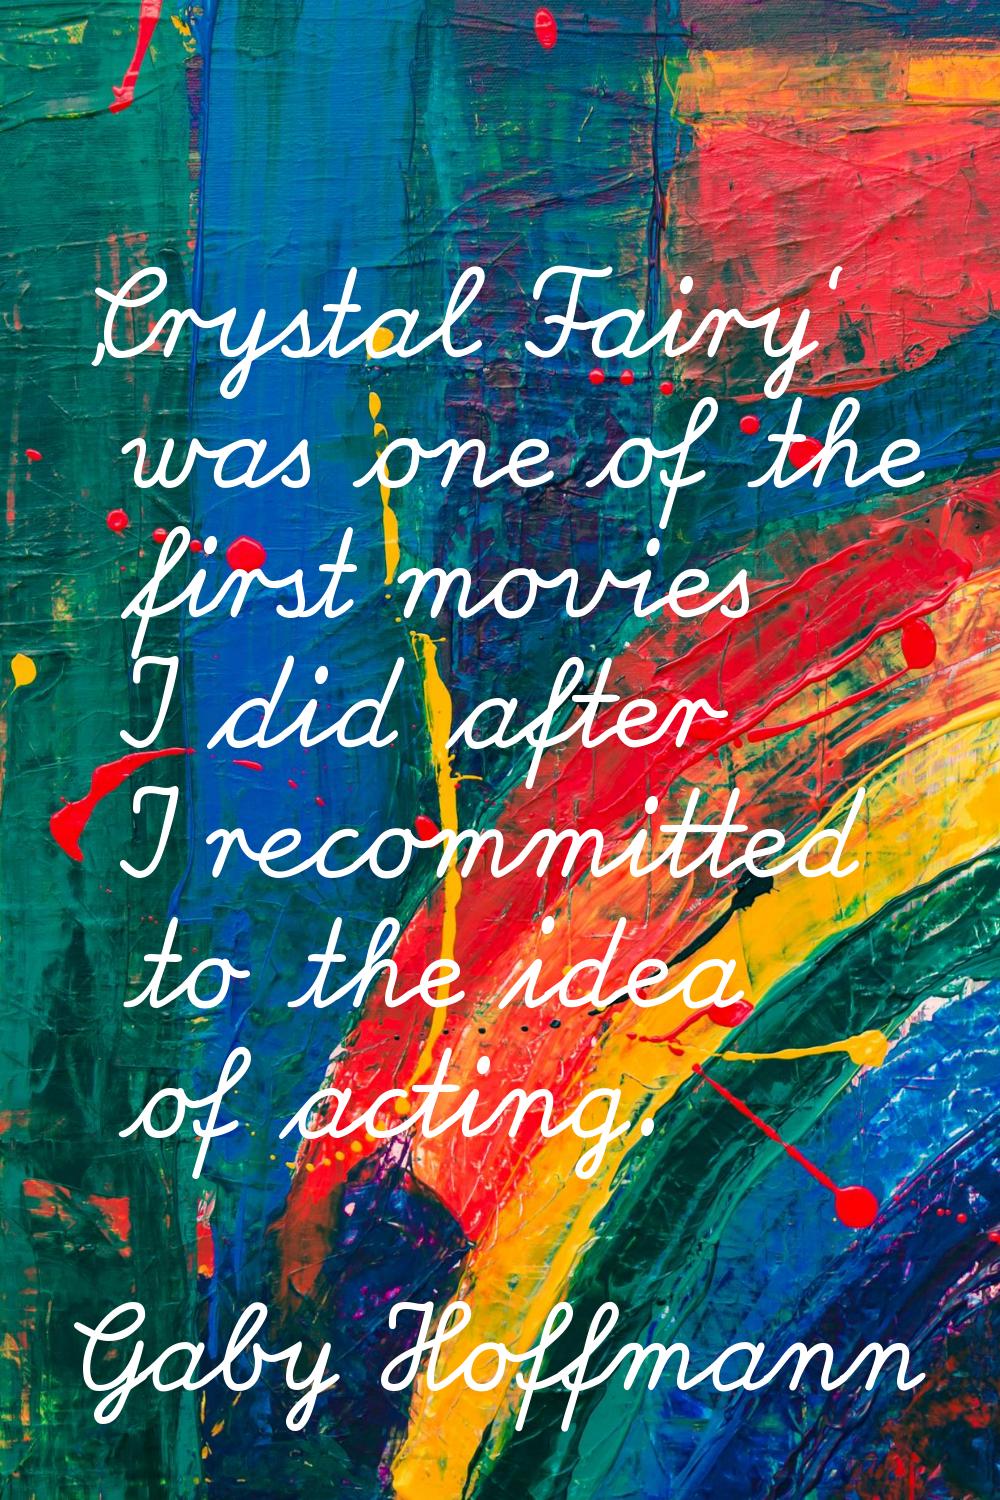 'Crystal Fairy' was one of the first movies I did after I recommitted to the idea of acting.